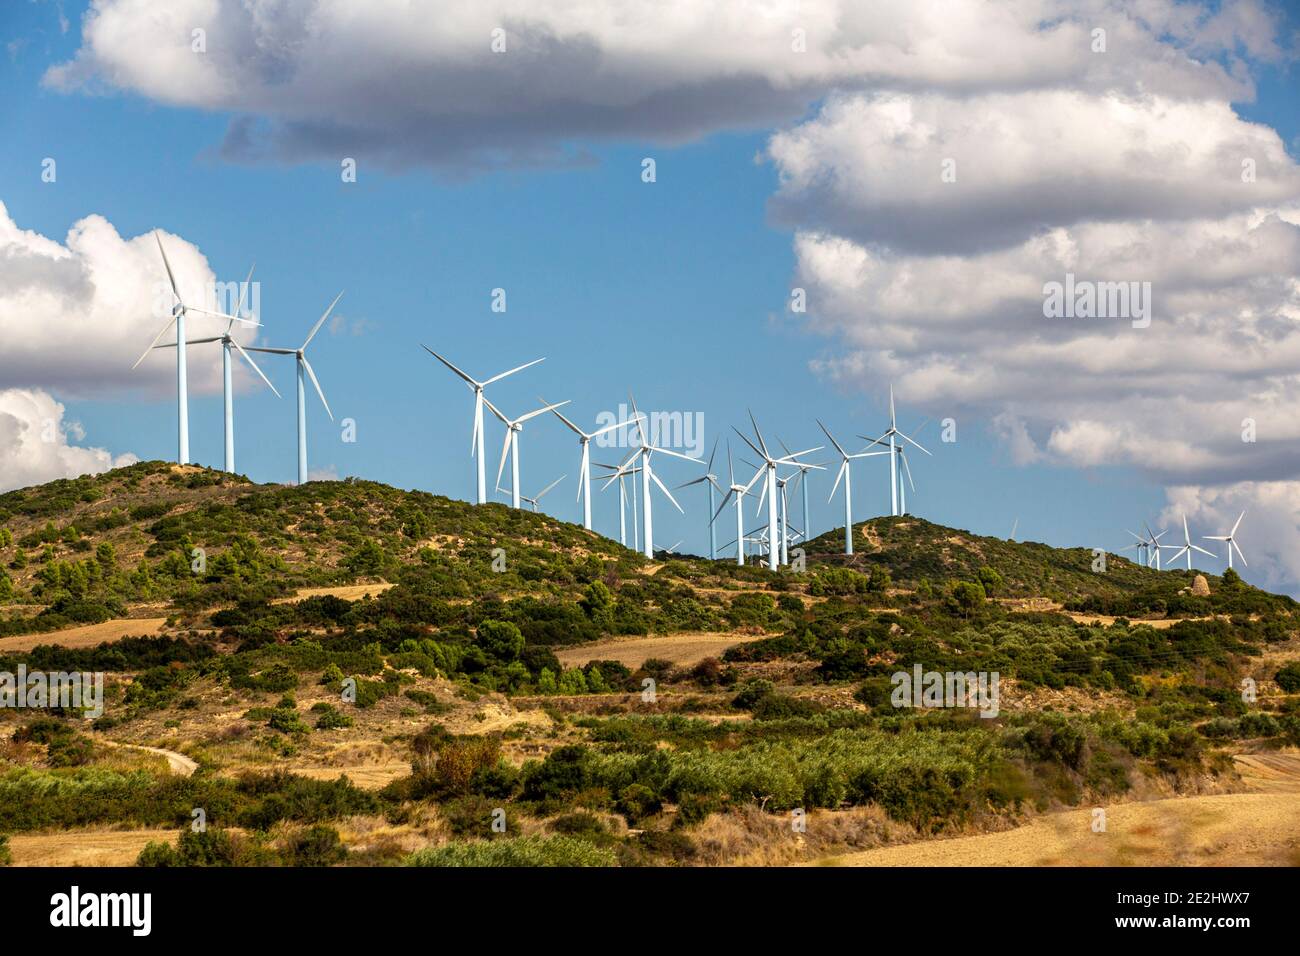 Spain: windmills and clouds in the semi-desert natural region of the Bardenas Reales, Navarre Stock Photo